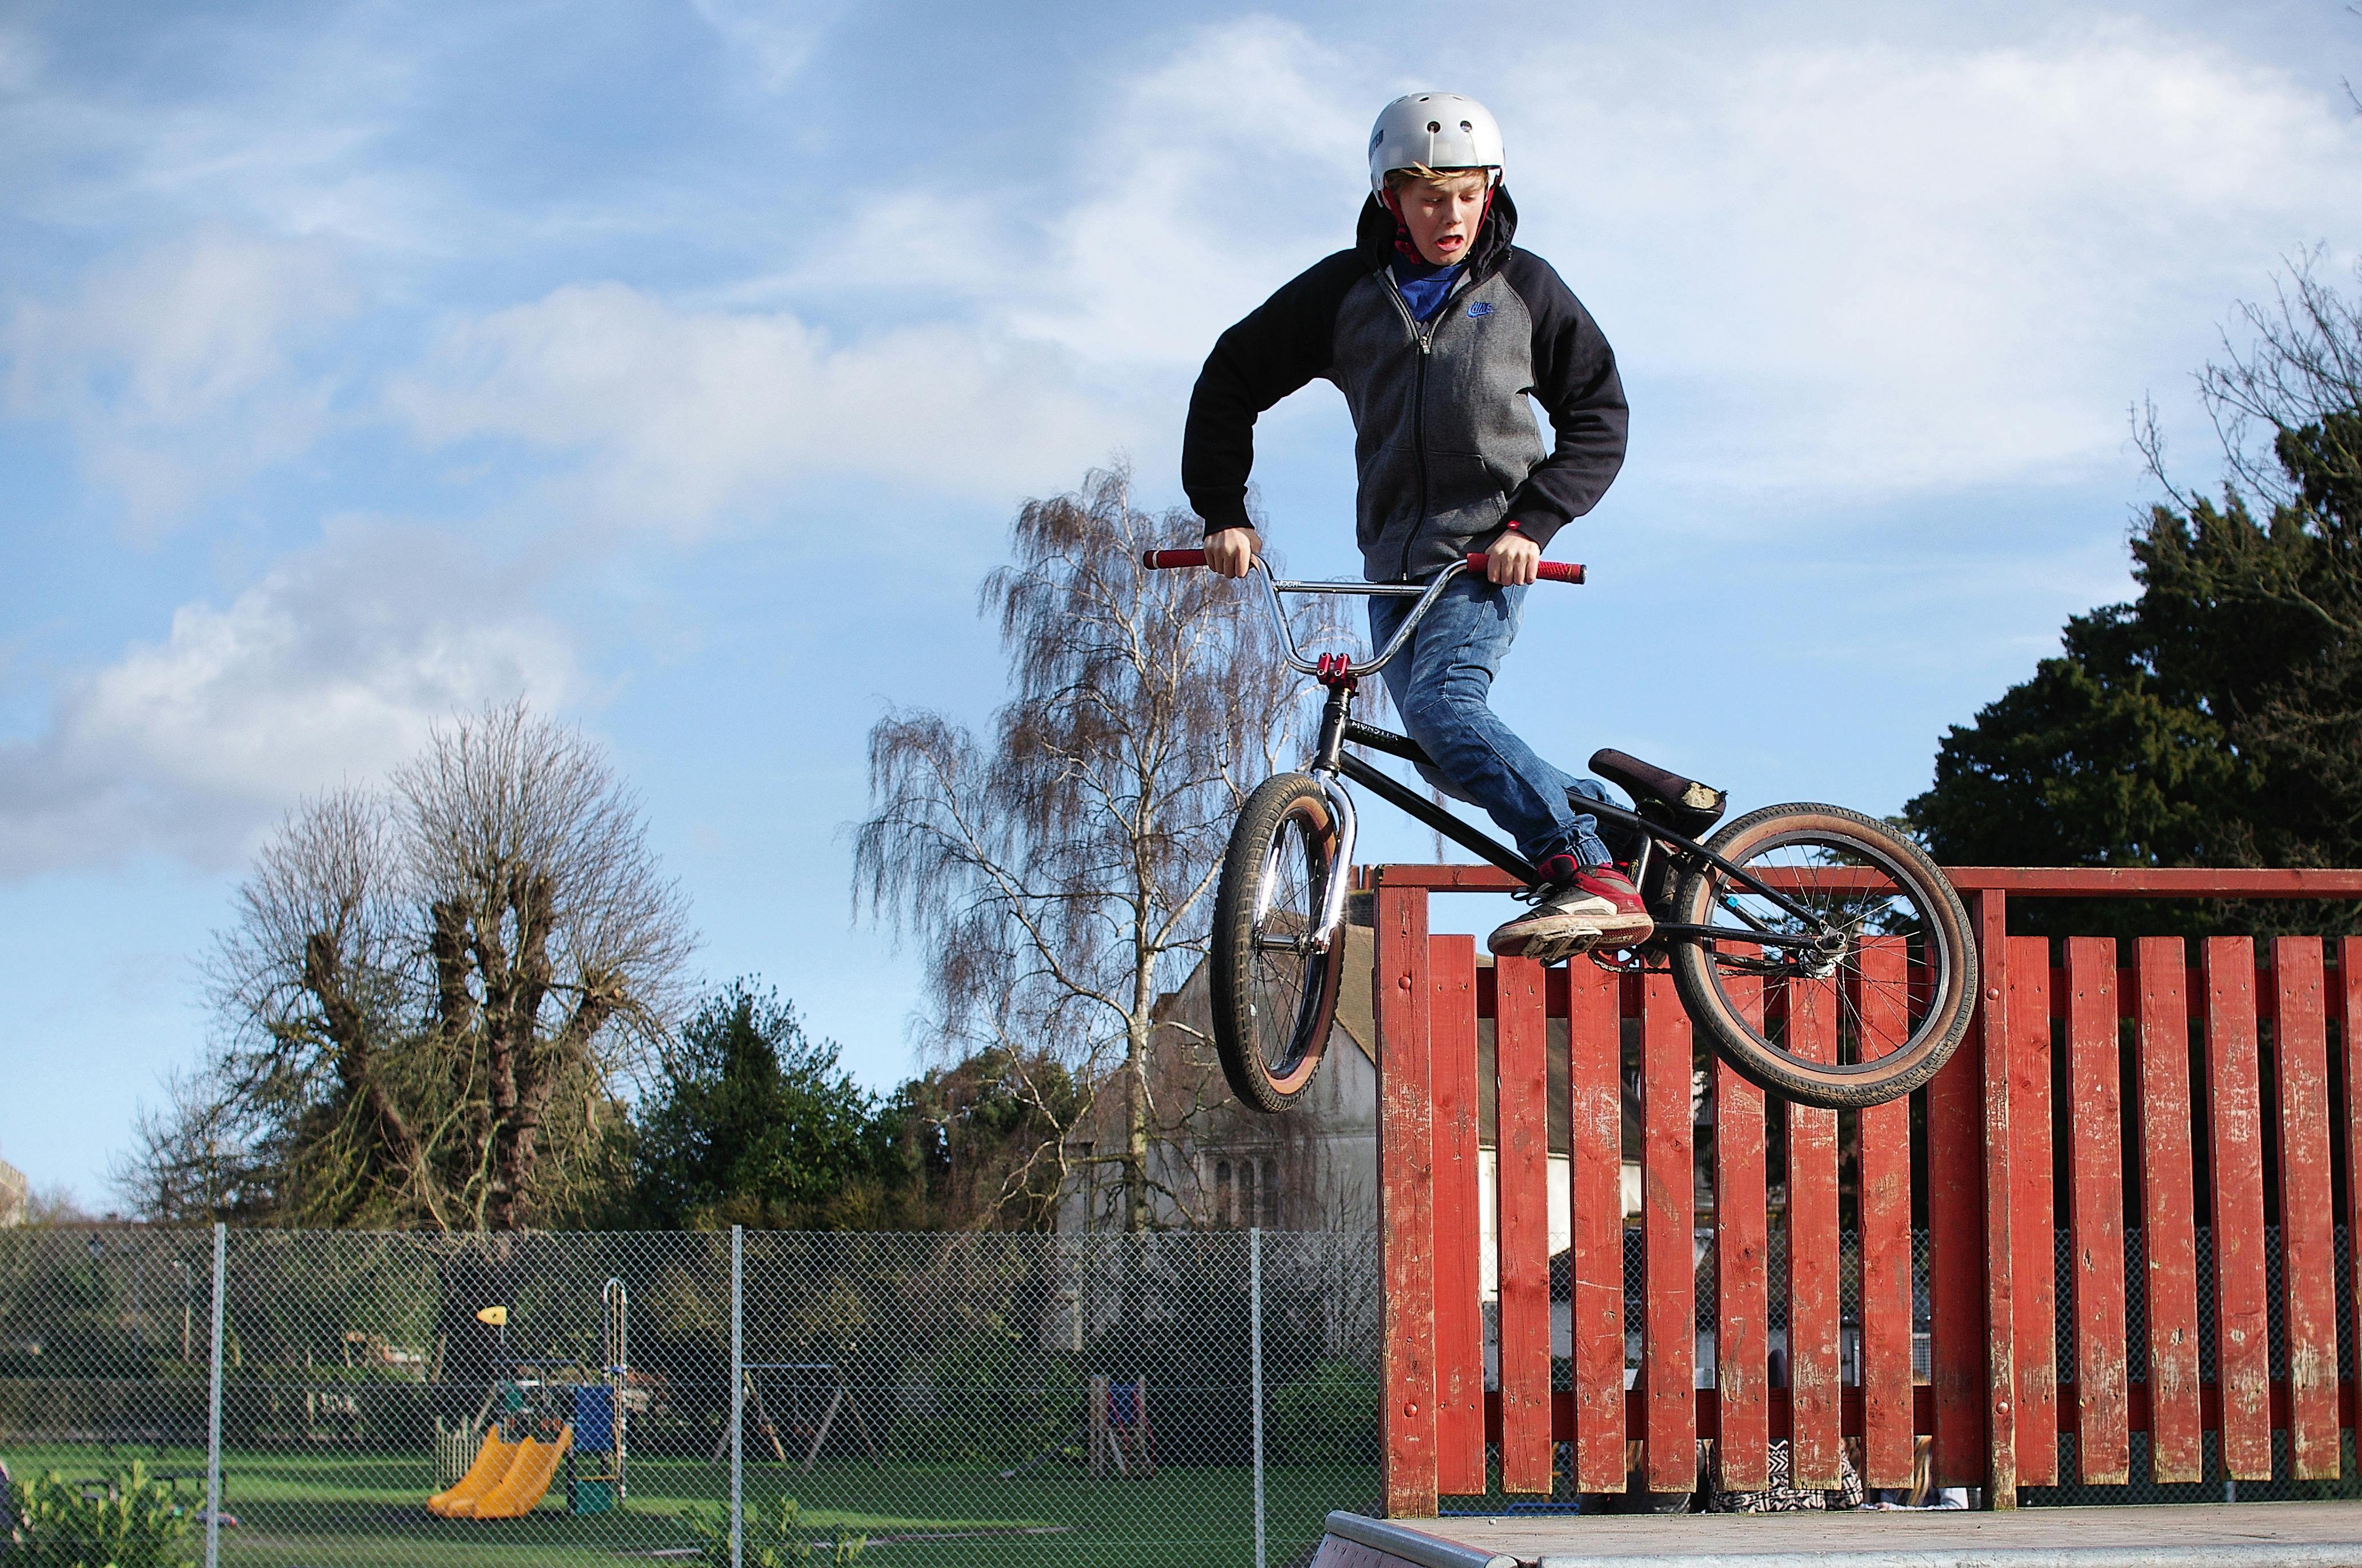 PICTURE OF A BOY JUMPING ON A BMX